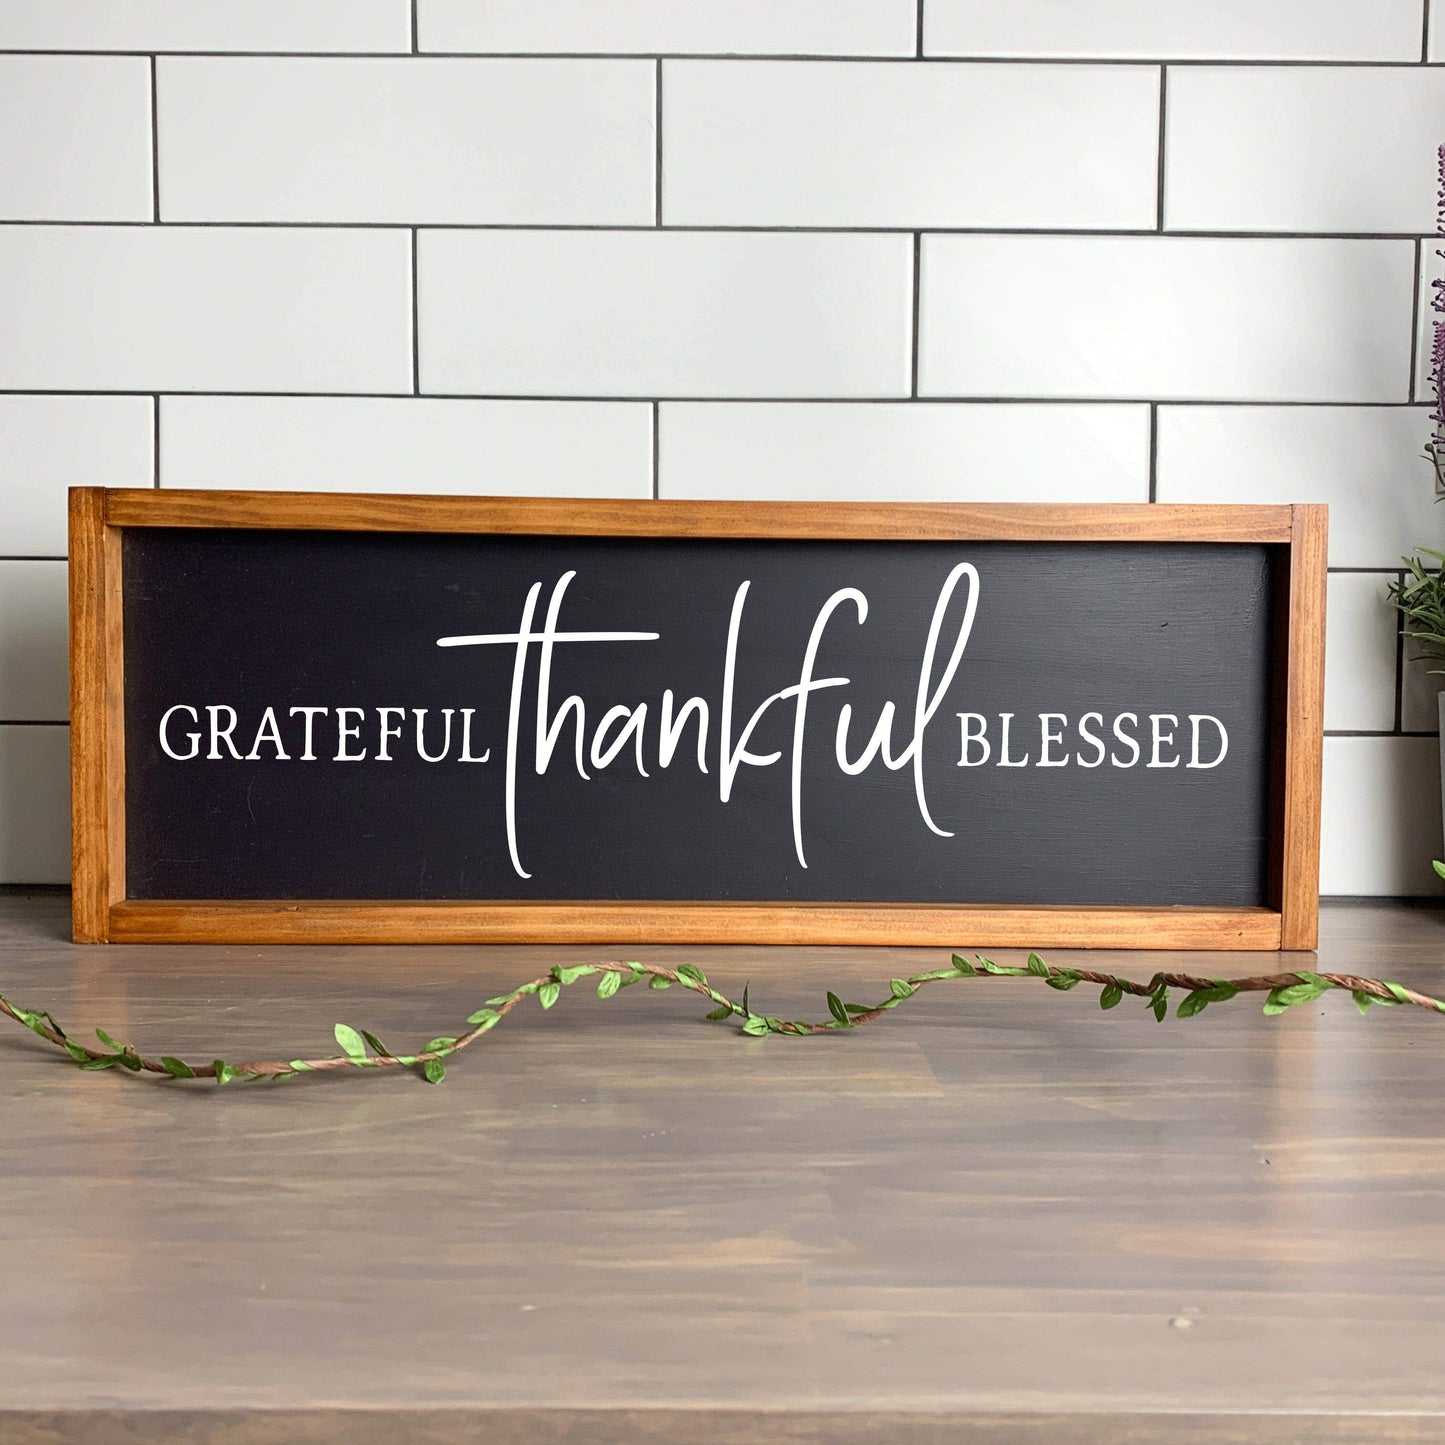 Greatful, Thankful Blessed framed wood sign, farmhouse sign, rustic decor, home decor